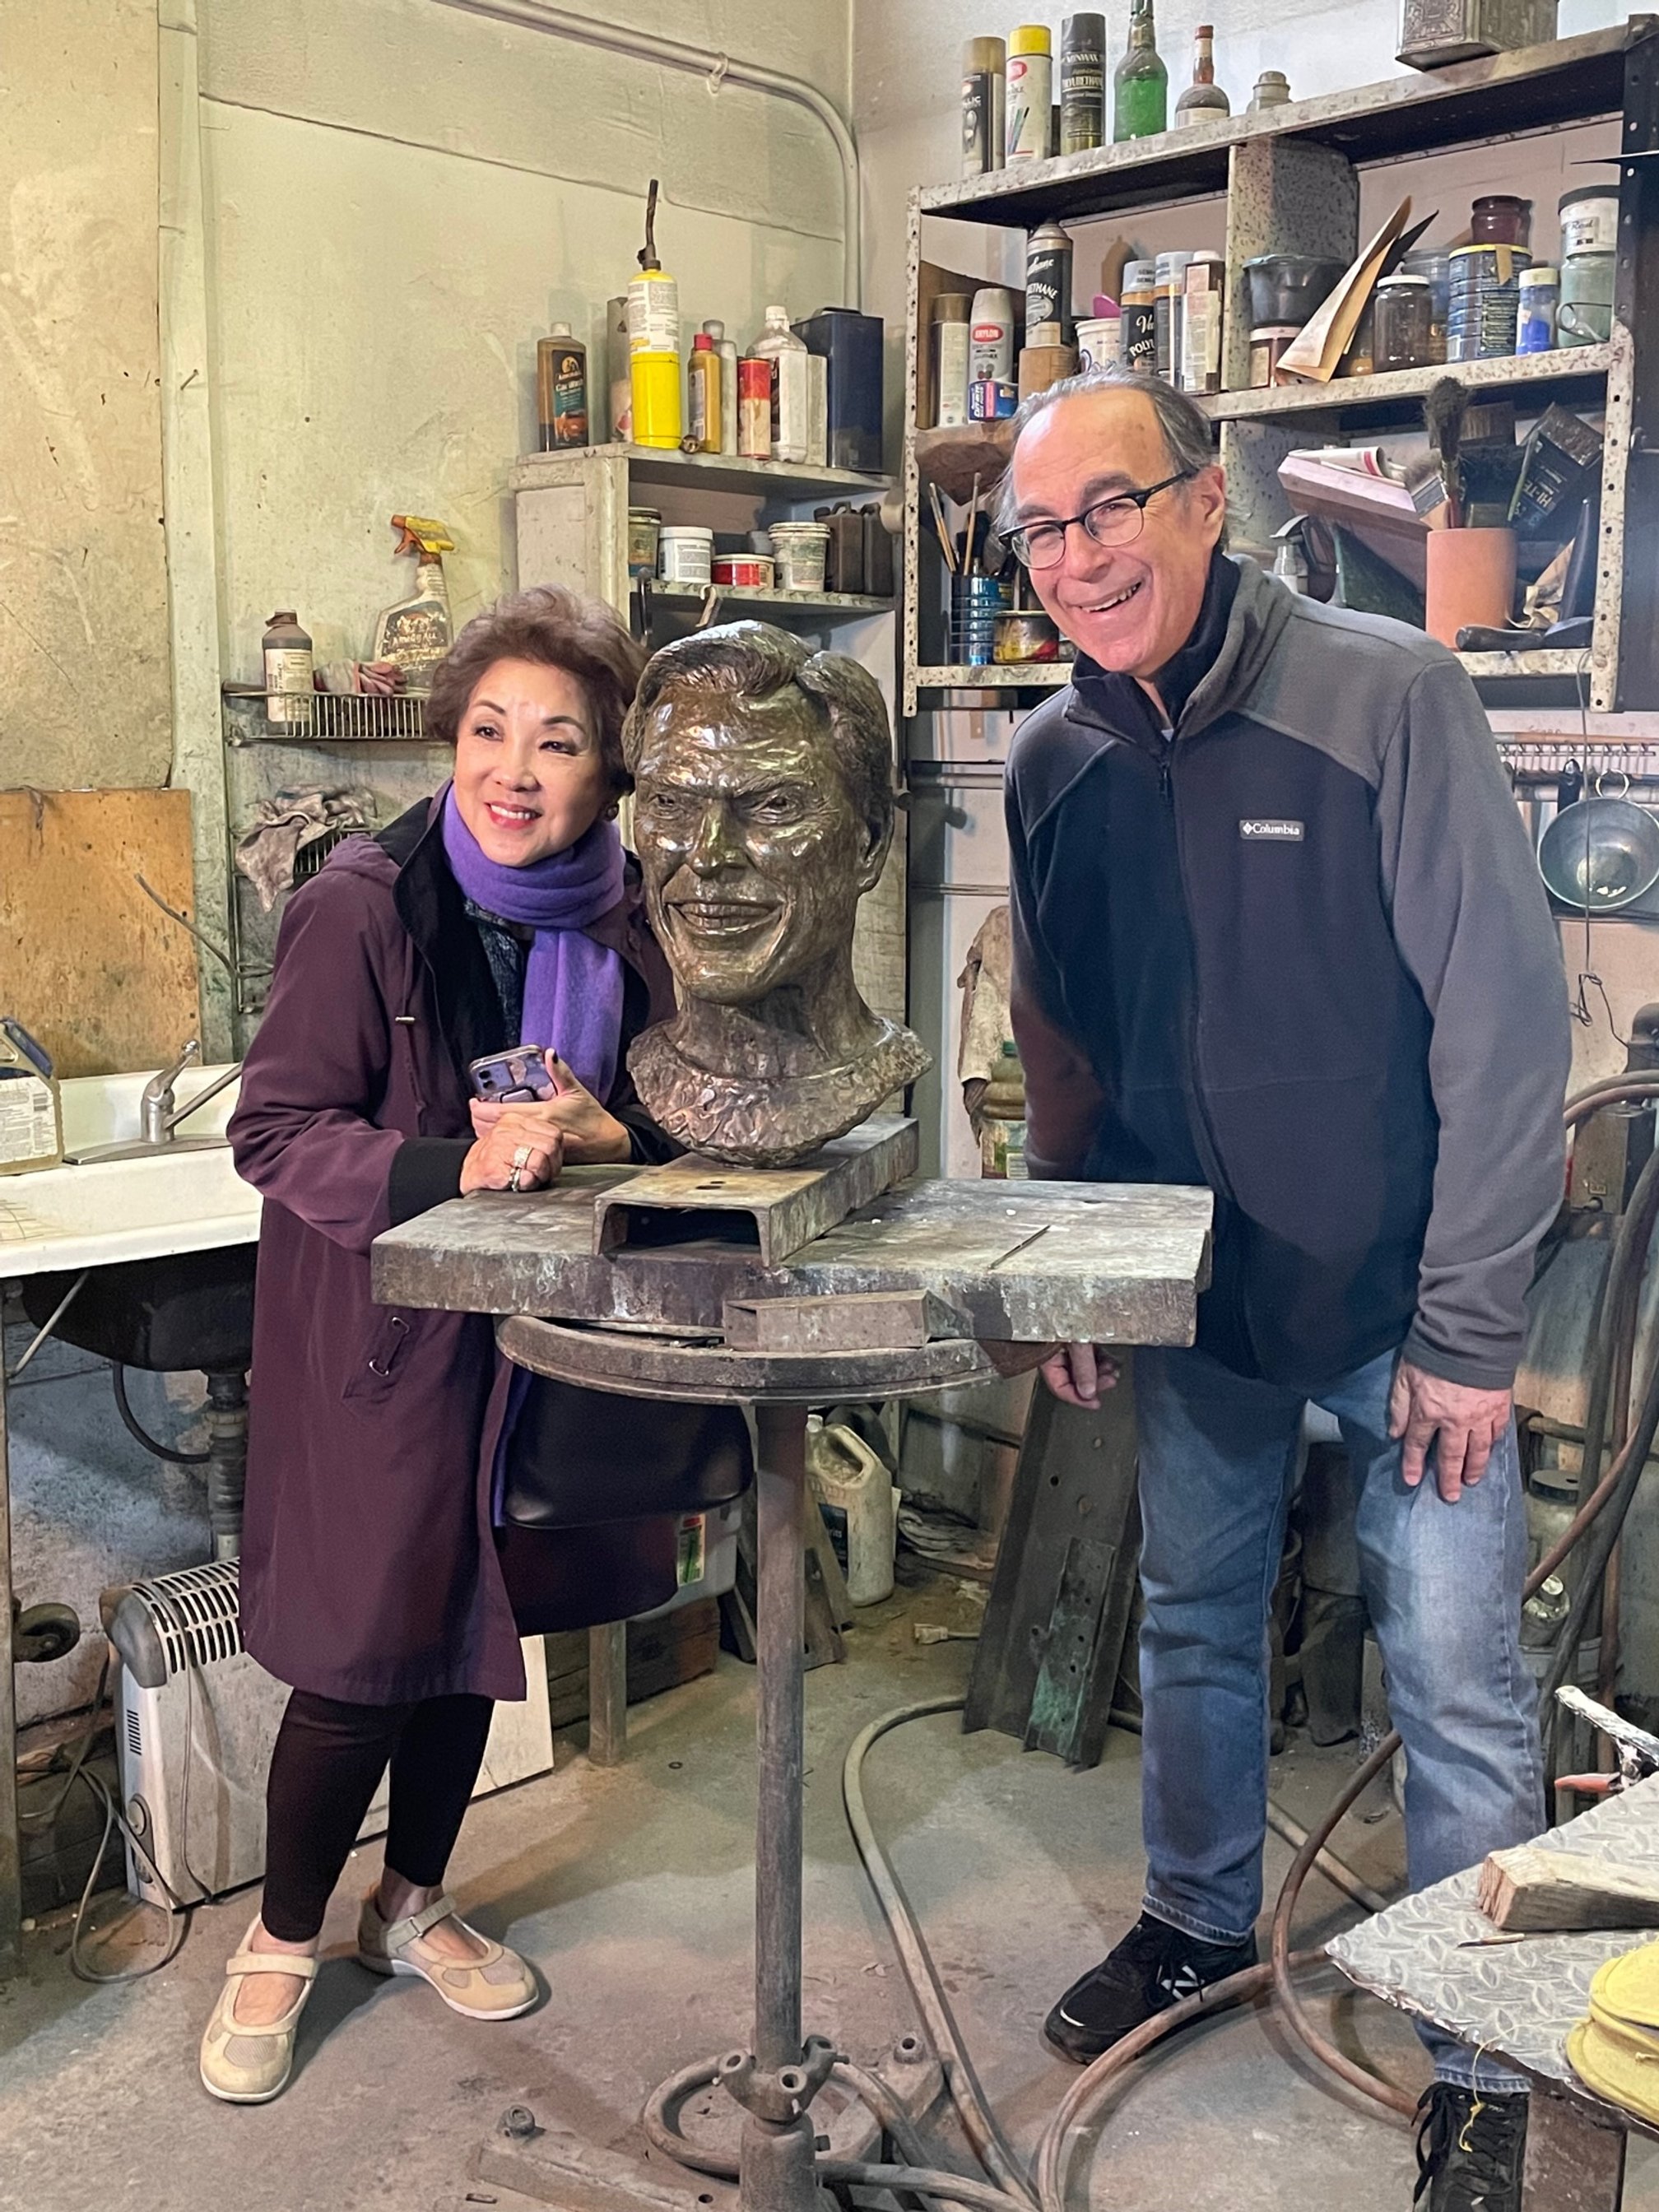 Project patron Shining Sung with Jacques' bust and Marc